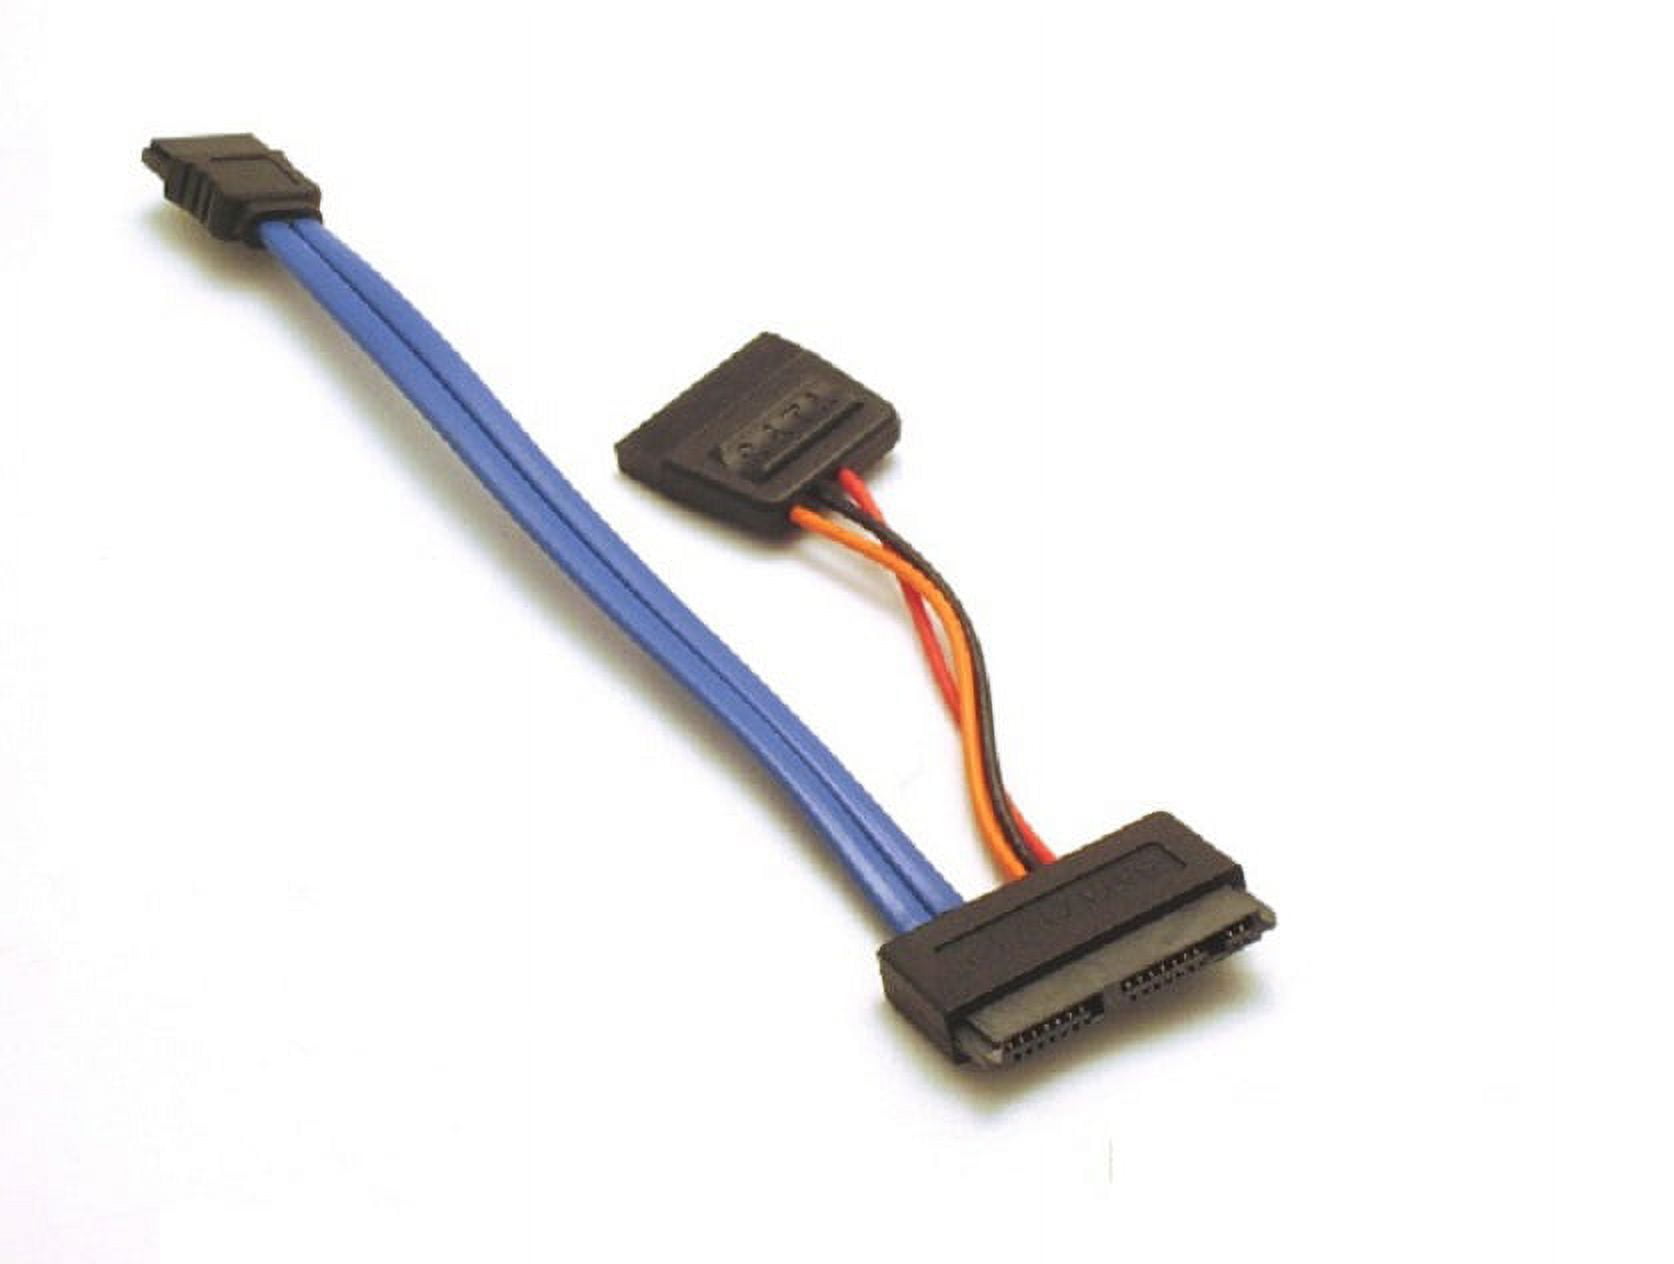 SATA DATA AND POWER CABLES